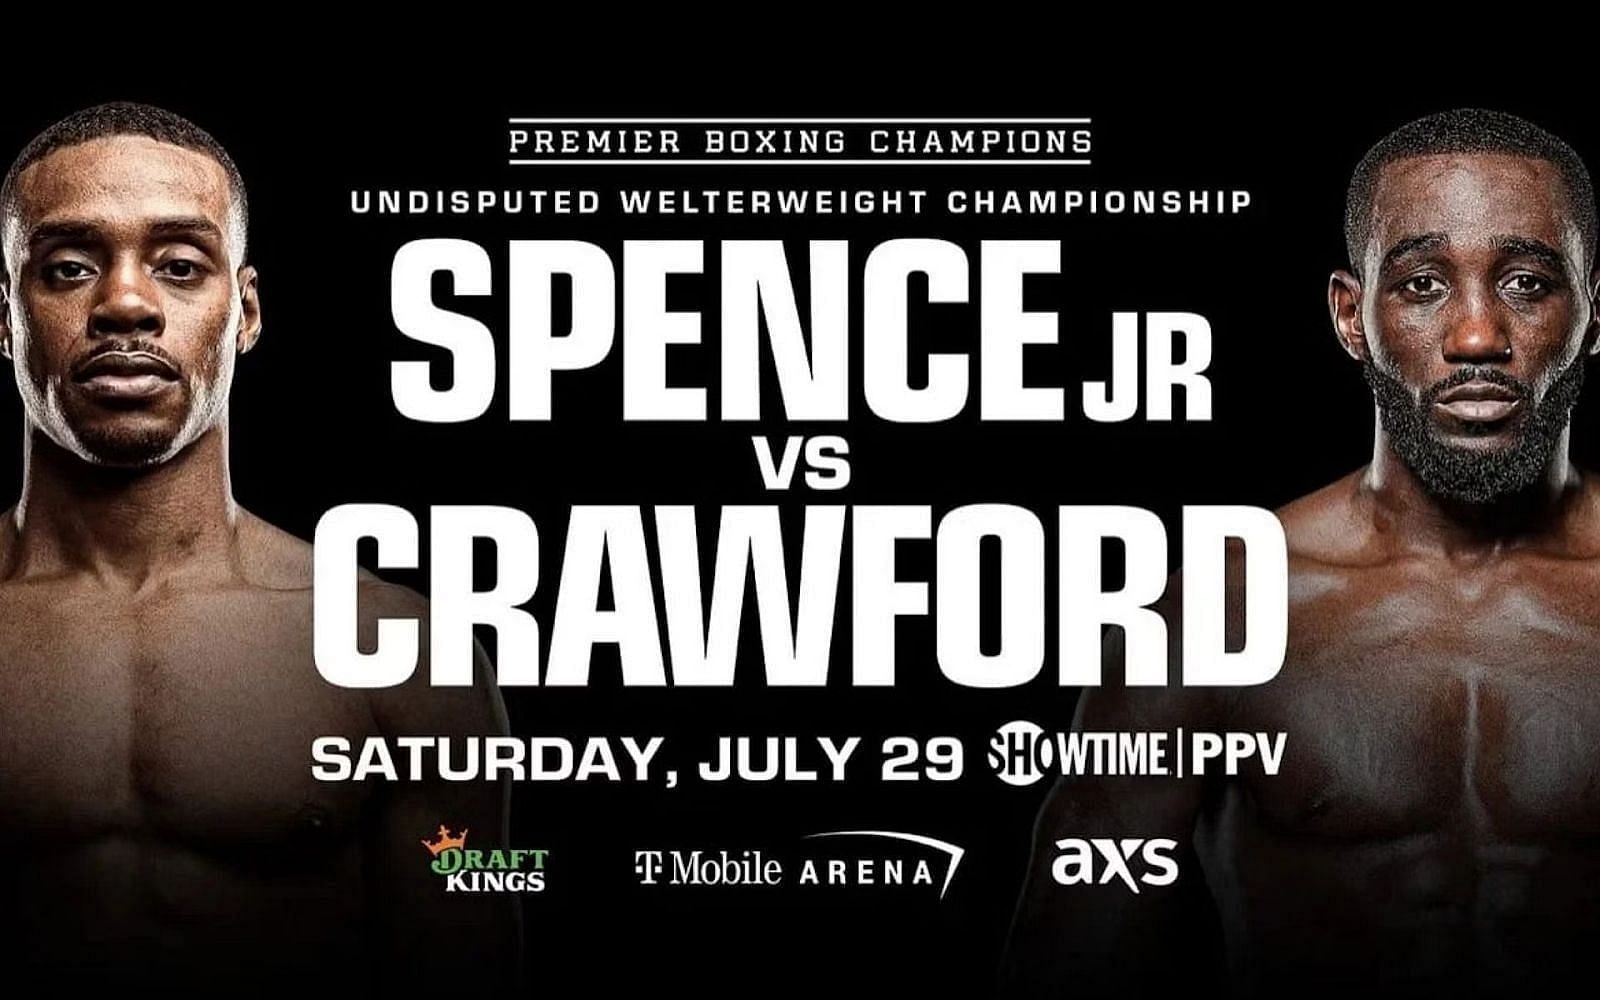 [Poster via @ShowtimeBoxing on Twitter.]